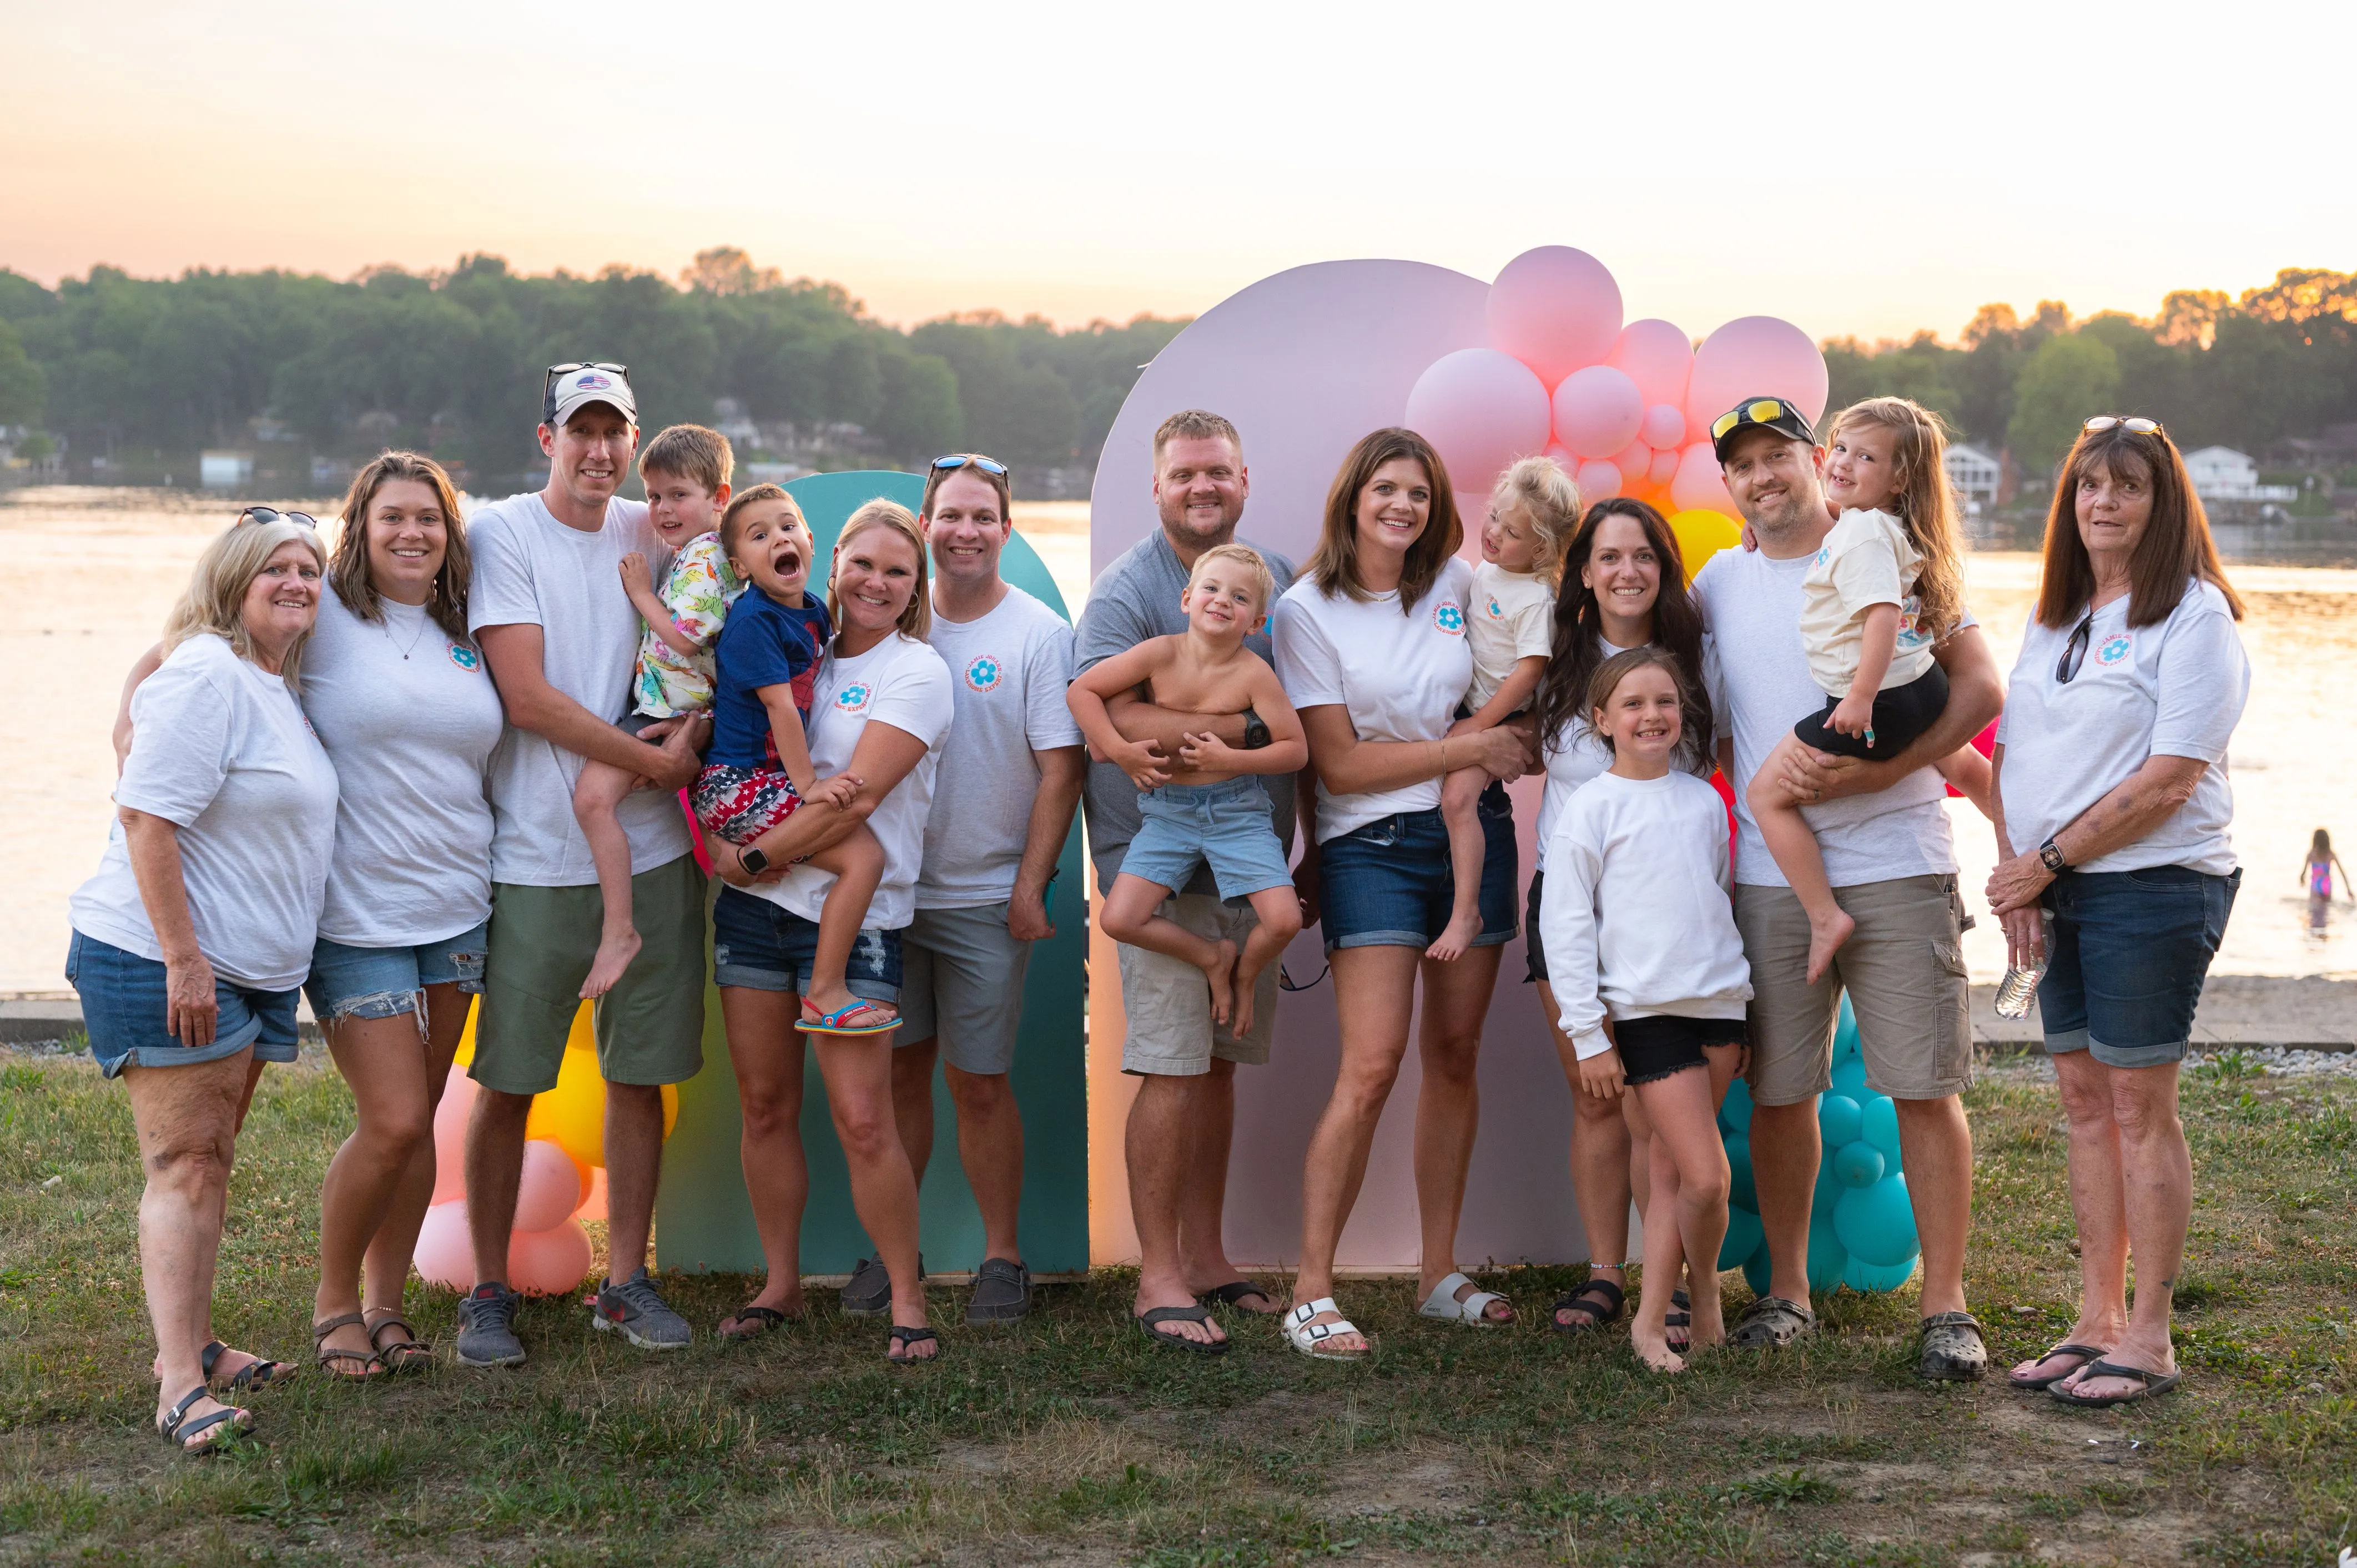 Group of people posing for a family photo outdoors near a lake at dusk, with some holding balloons.